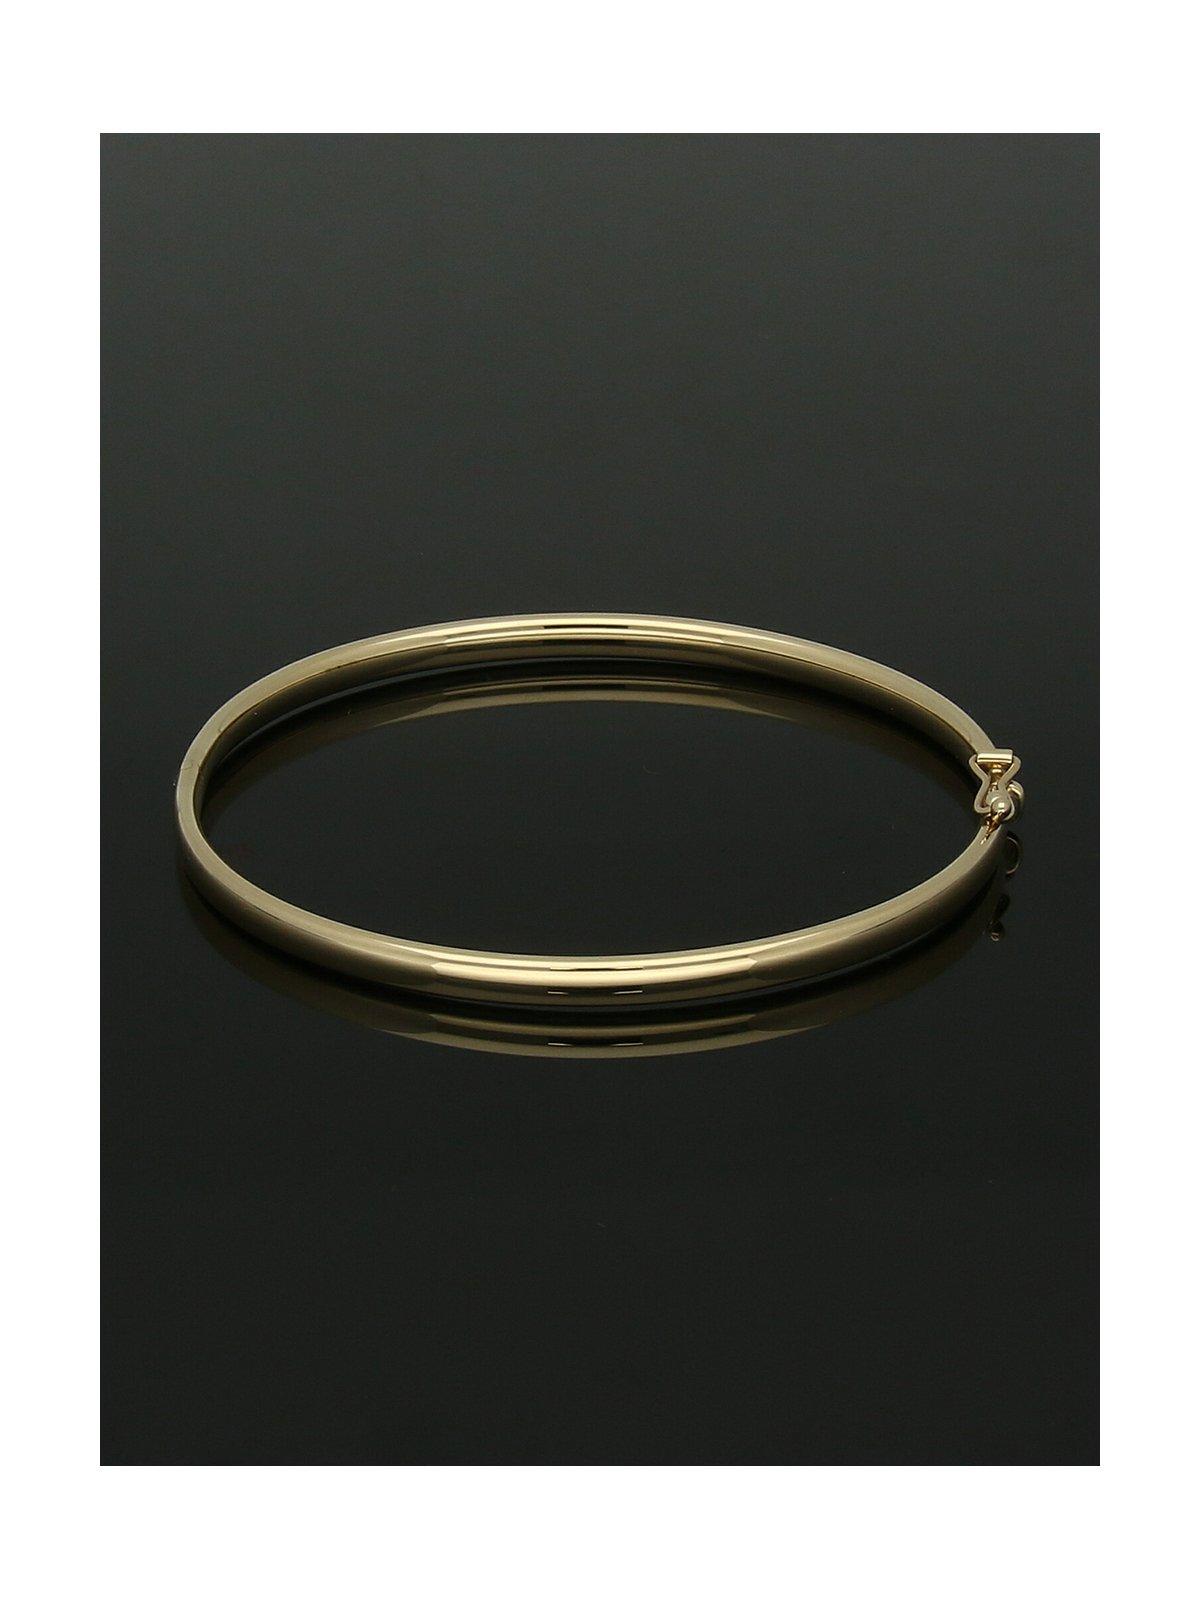 Oval Hinged Bangle in 9ct Yellow Gold